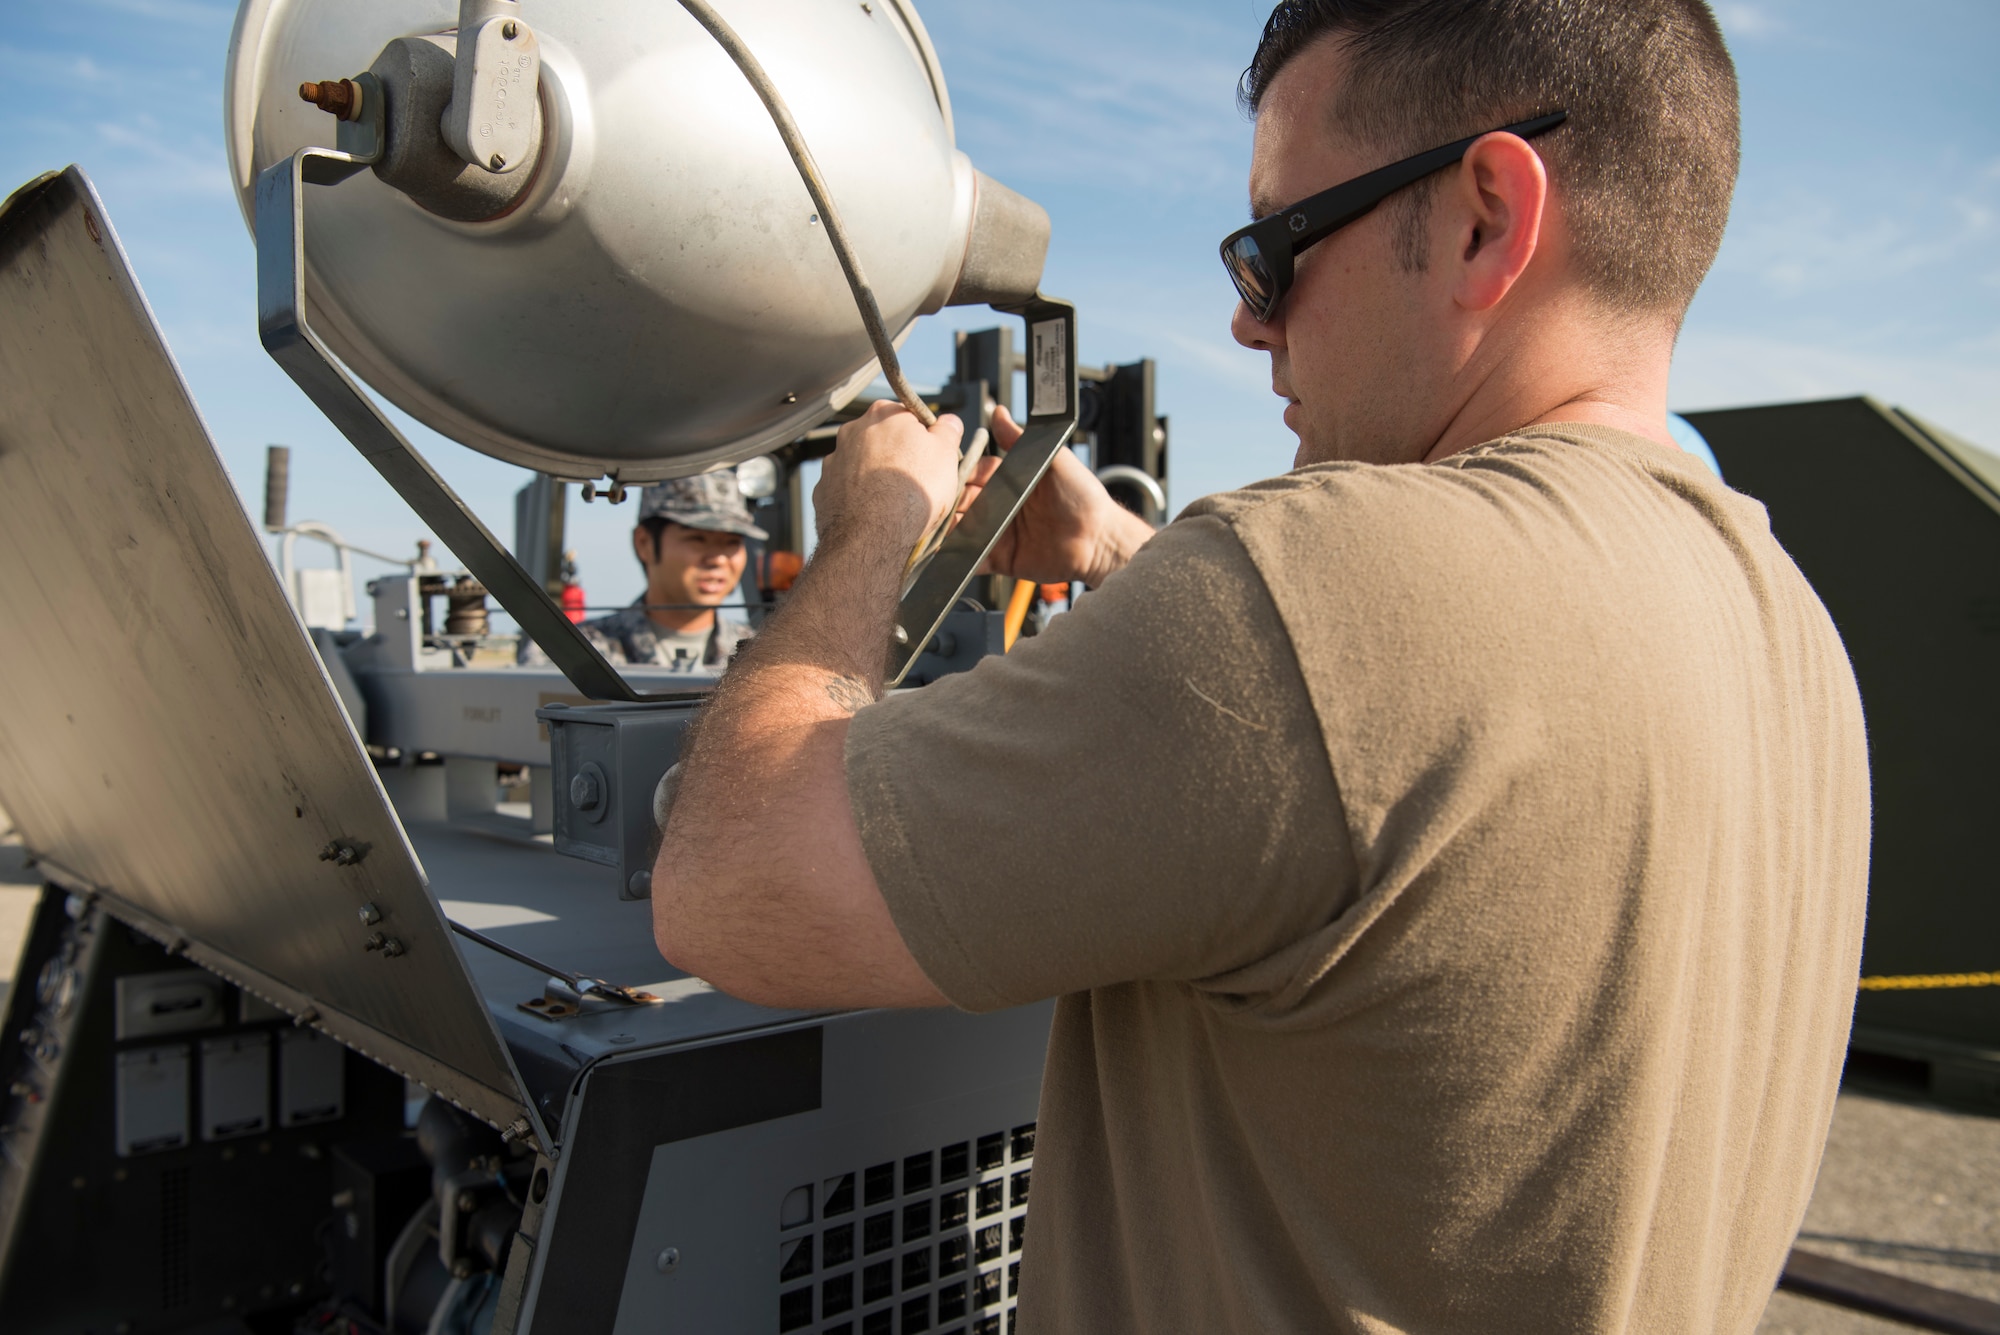 U.S. Air Force Tech. Sgt. Jesse Reddam, the 35th Maintenance Squadron aerospace ground equipment inspection and repair section chief, sets up AGE equipment during an aviation training relocation at Komatsu Air Base, Japan, Oct. 1, 2019. The week-long exercise included within visual range air-to-air combat, bilateral aircraft recovery, refueling, launching and joint usage and training of AGE equipment. (U.S. Air Force photo by Senior Airman Collette Brooks)